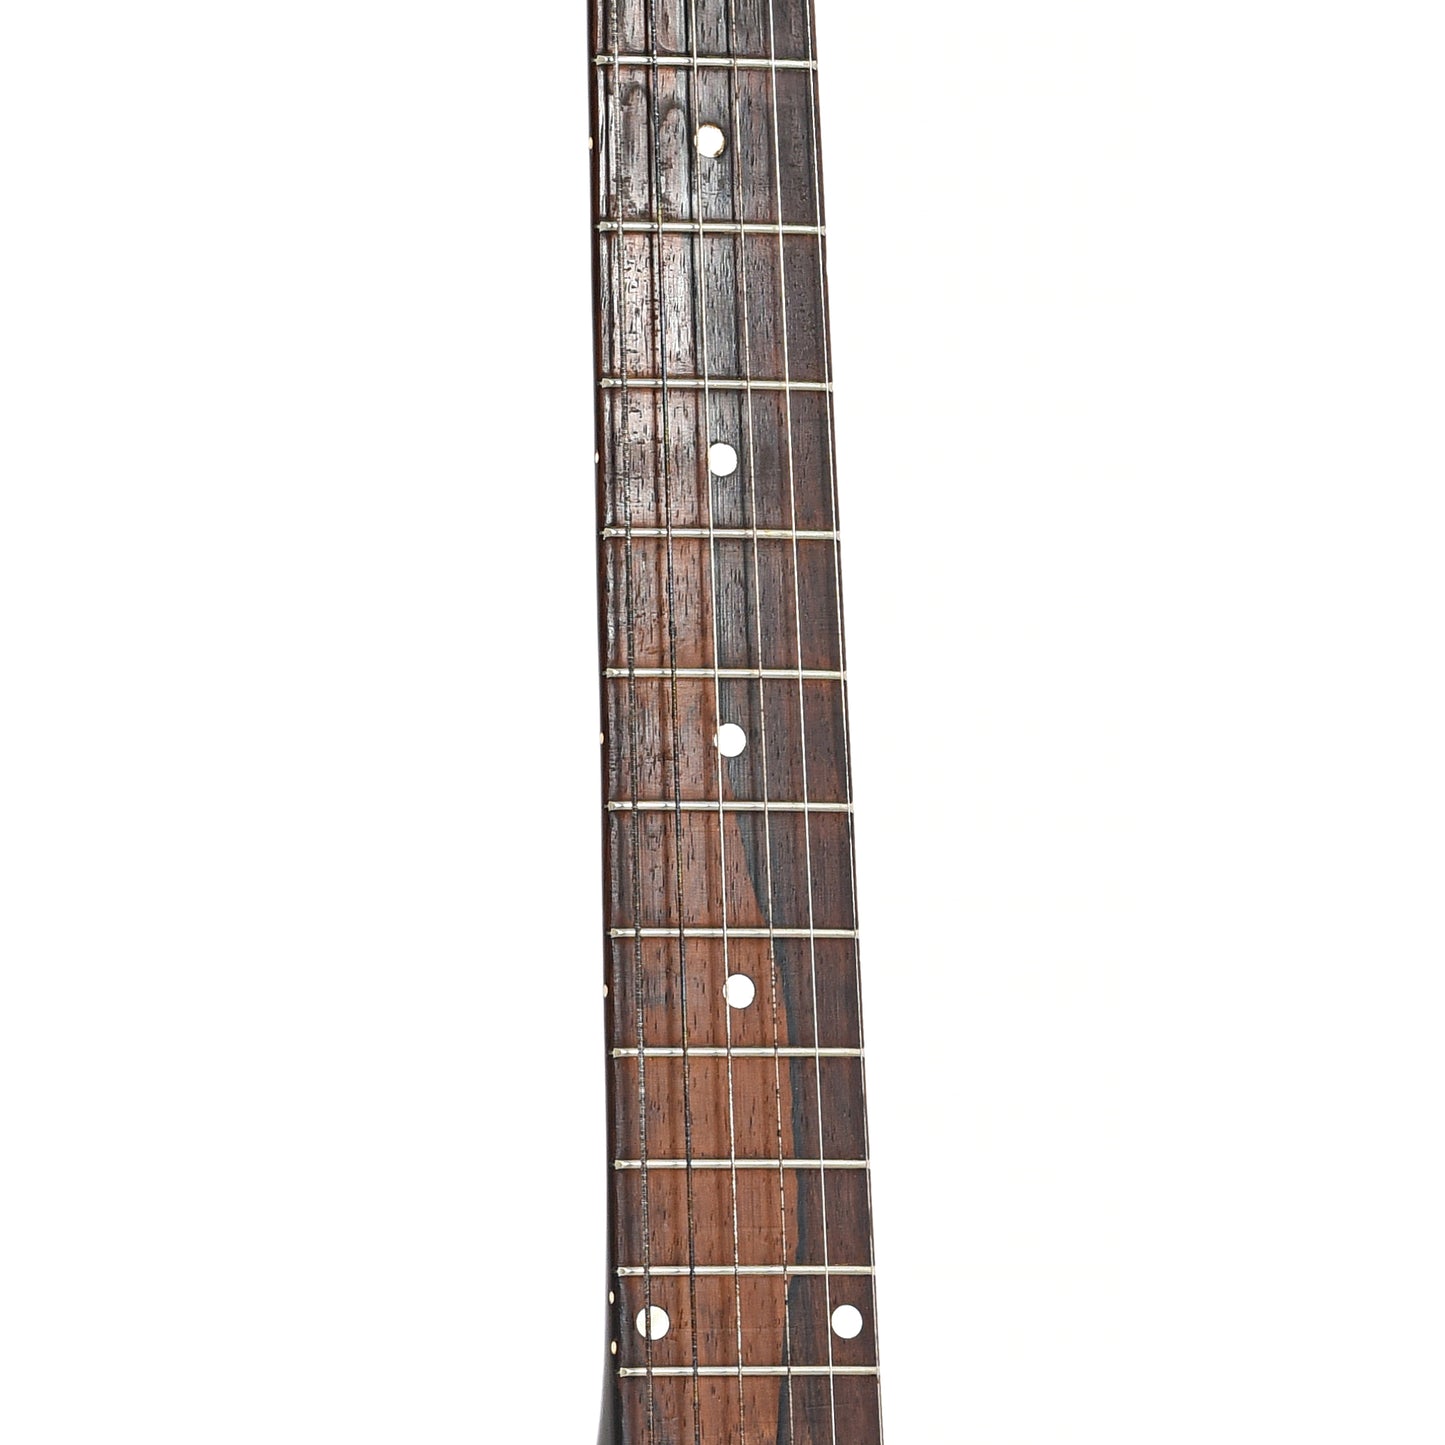 Fretboard of Gibson LG-1 Acoustic Guitar (1953)